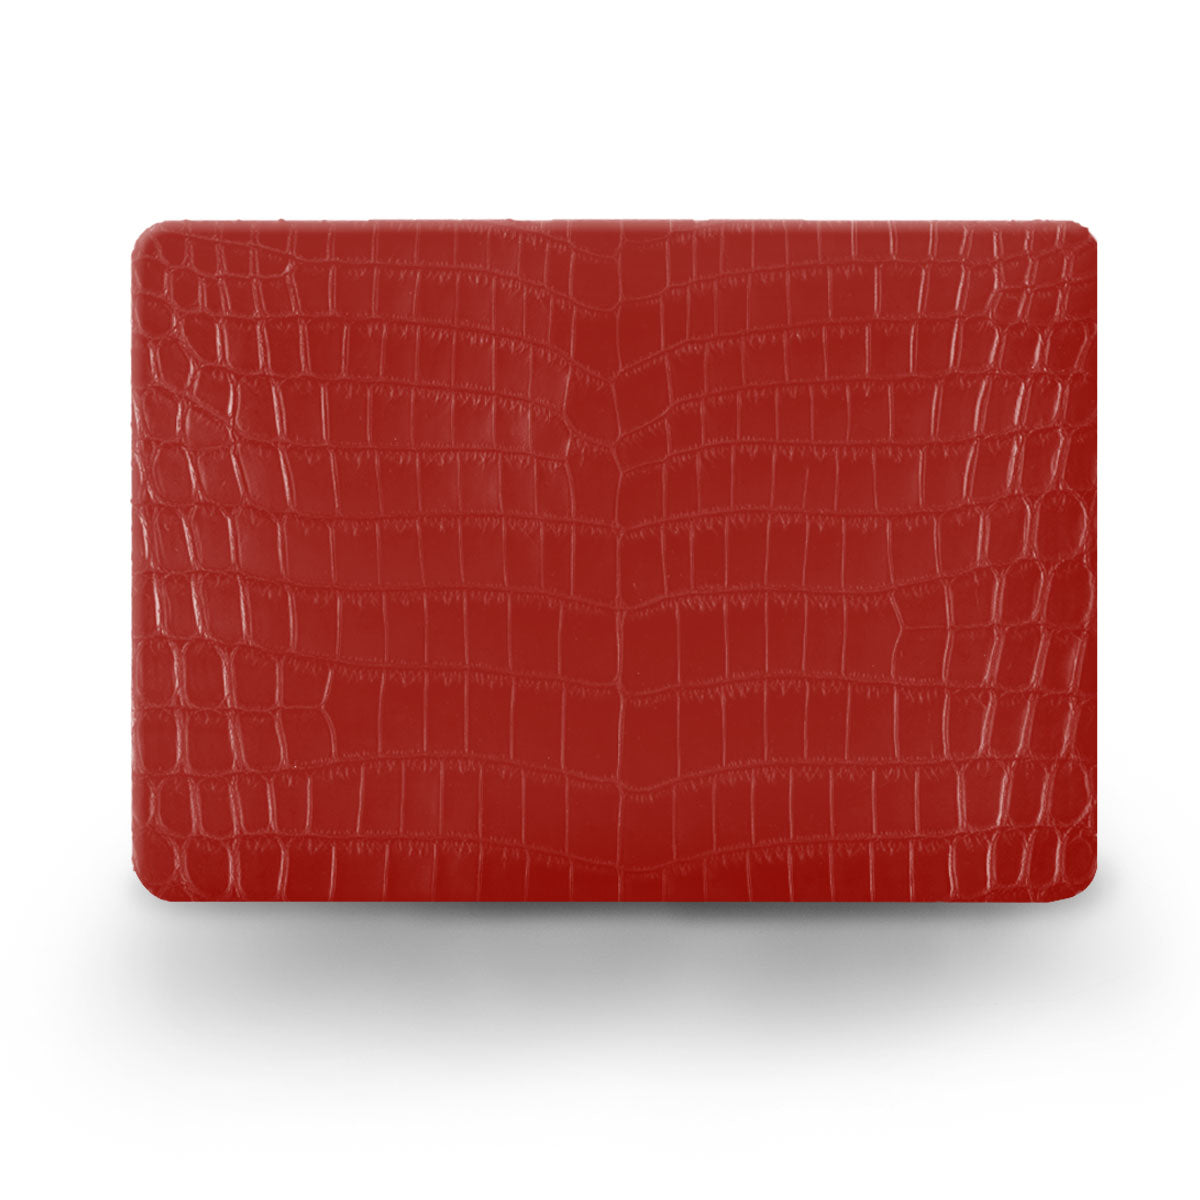 Leather iPad case / back cover - Macbook Pro & Air (13, 14, 15 and 16 inches) - Genuine alligator